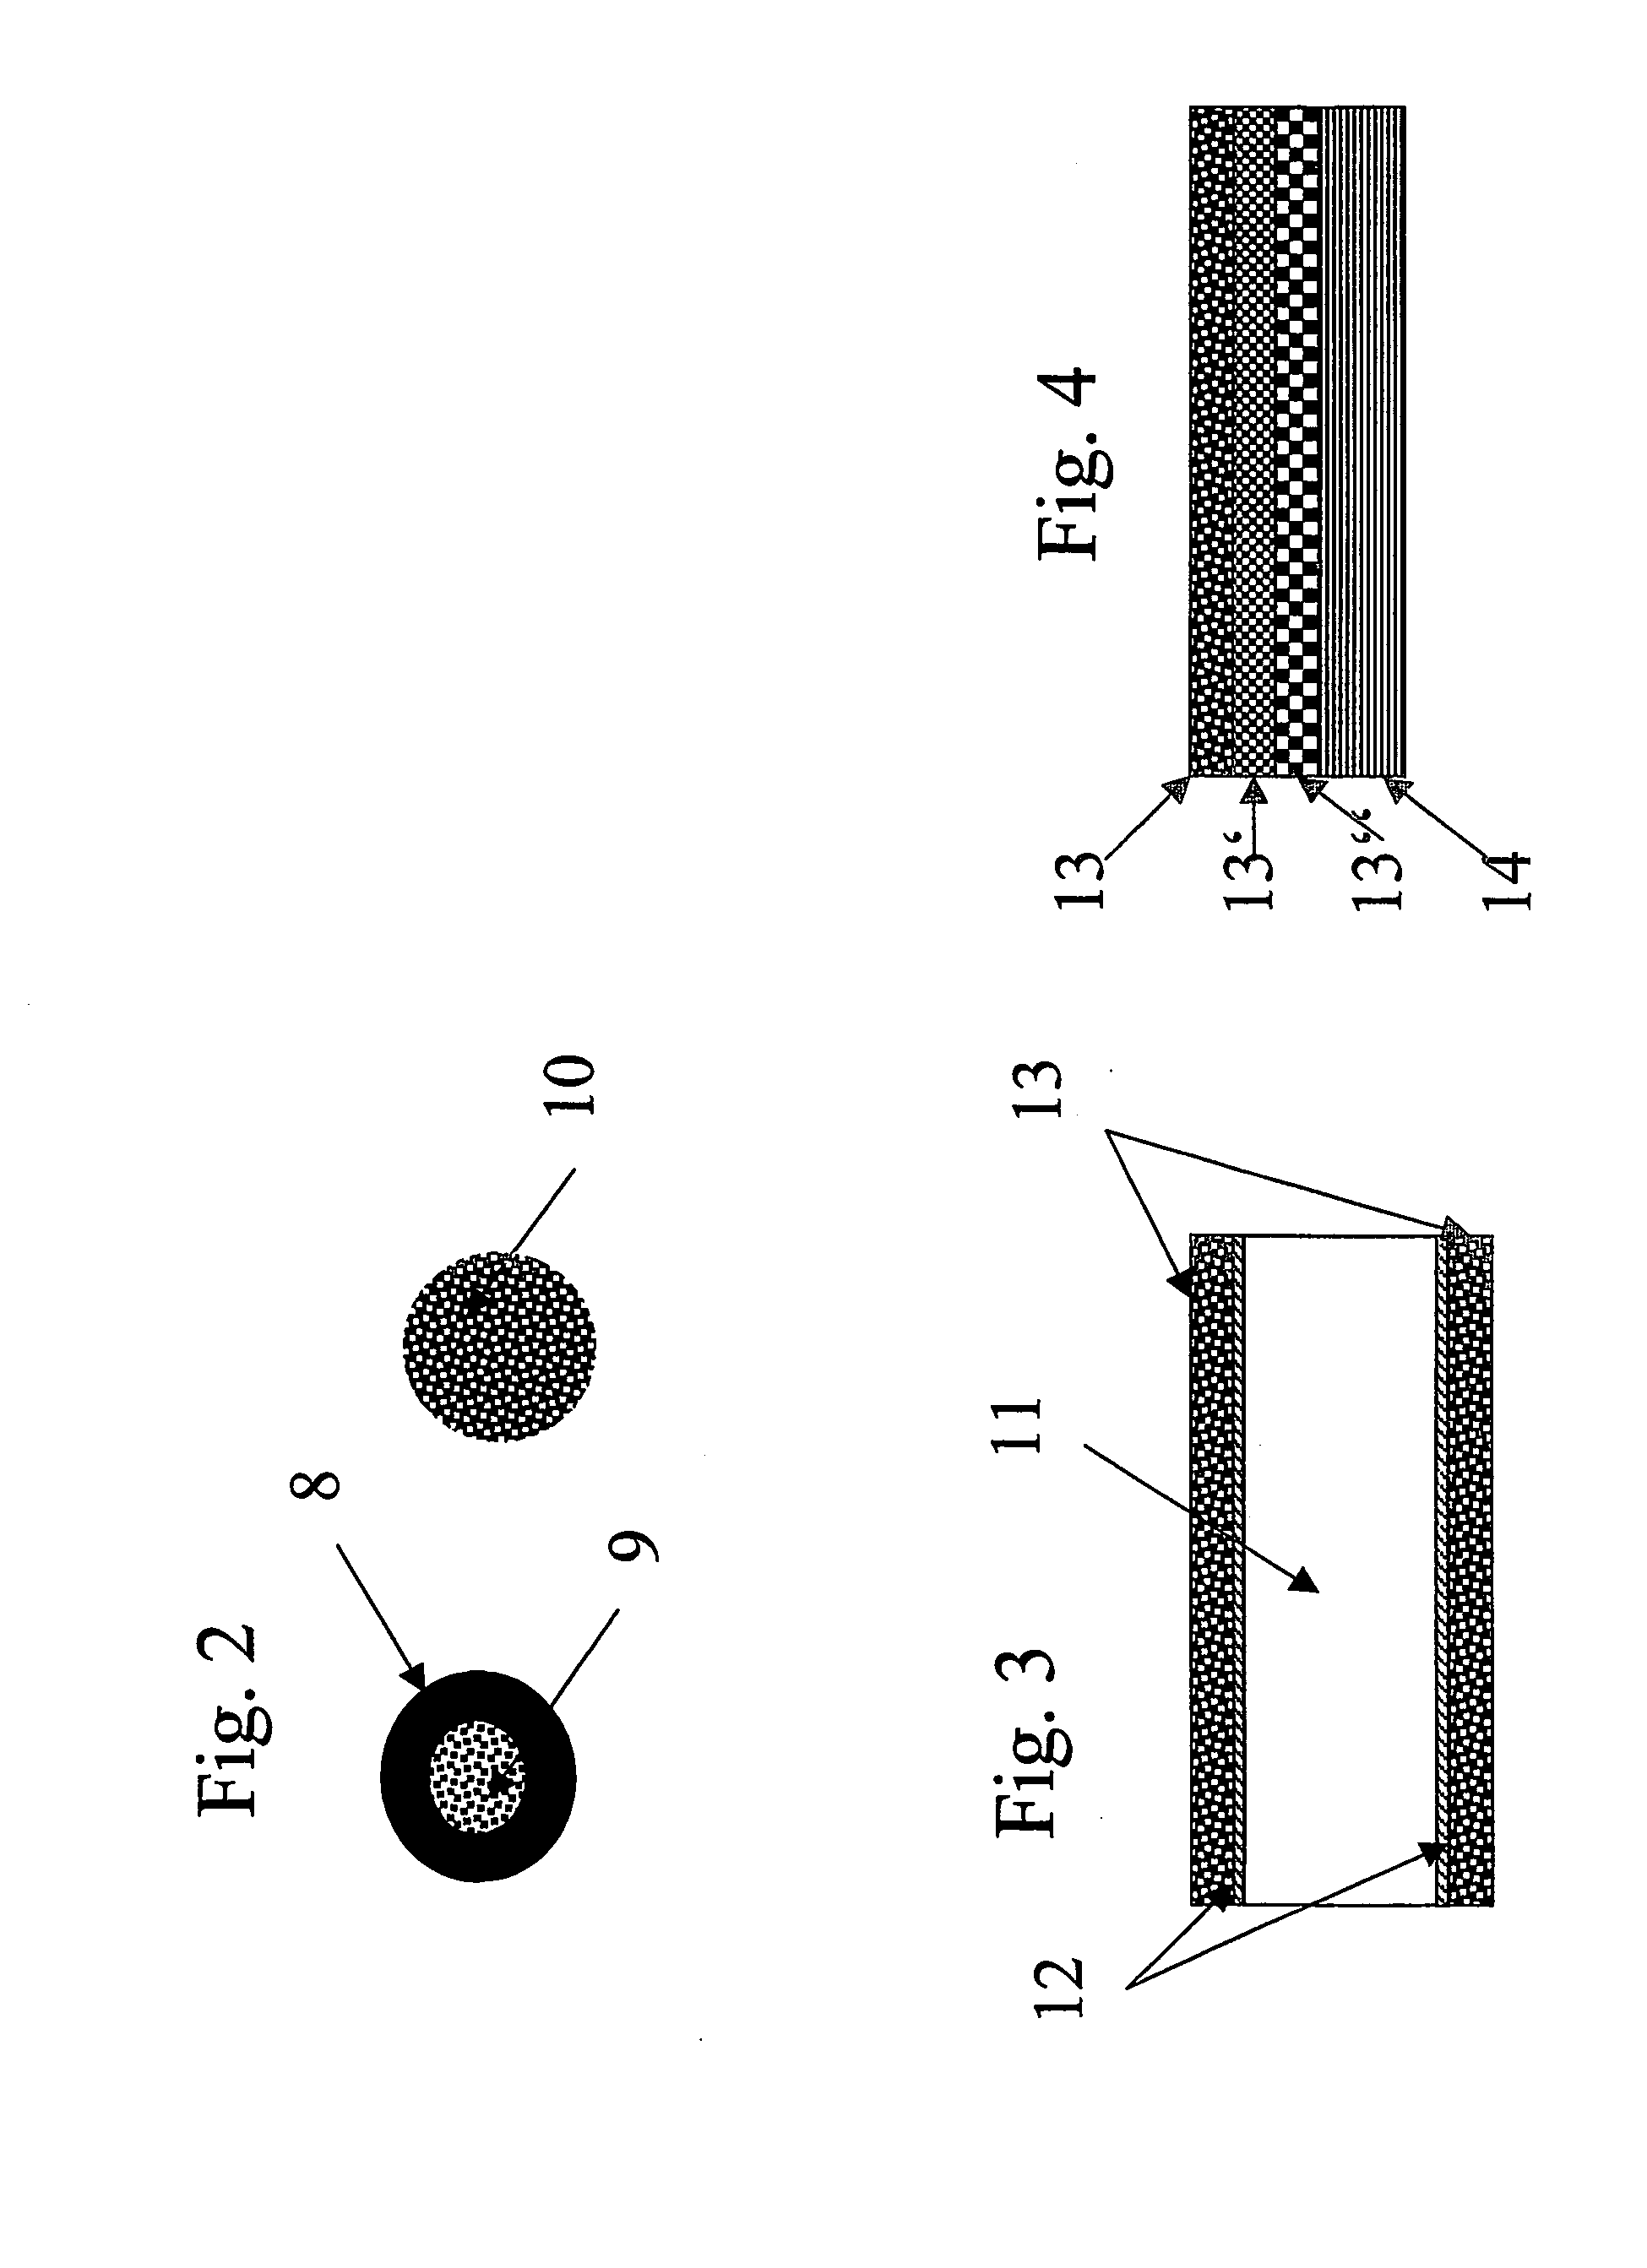 Composite material consisting of intermetallic phases and ceramics and production method for said material